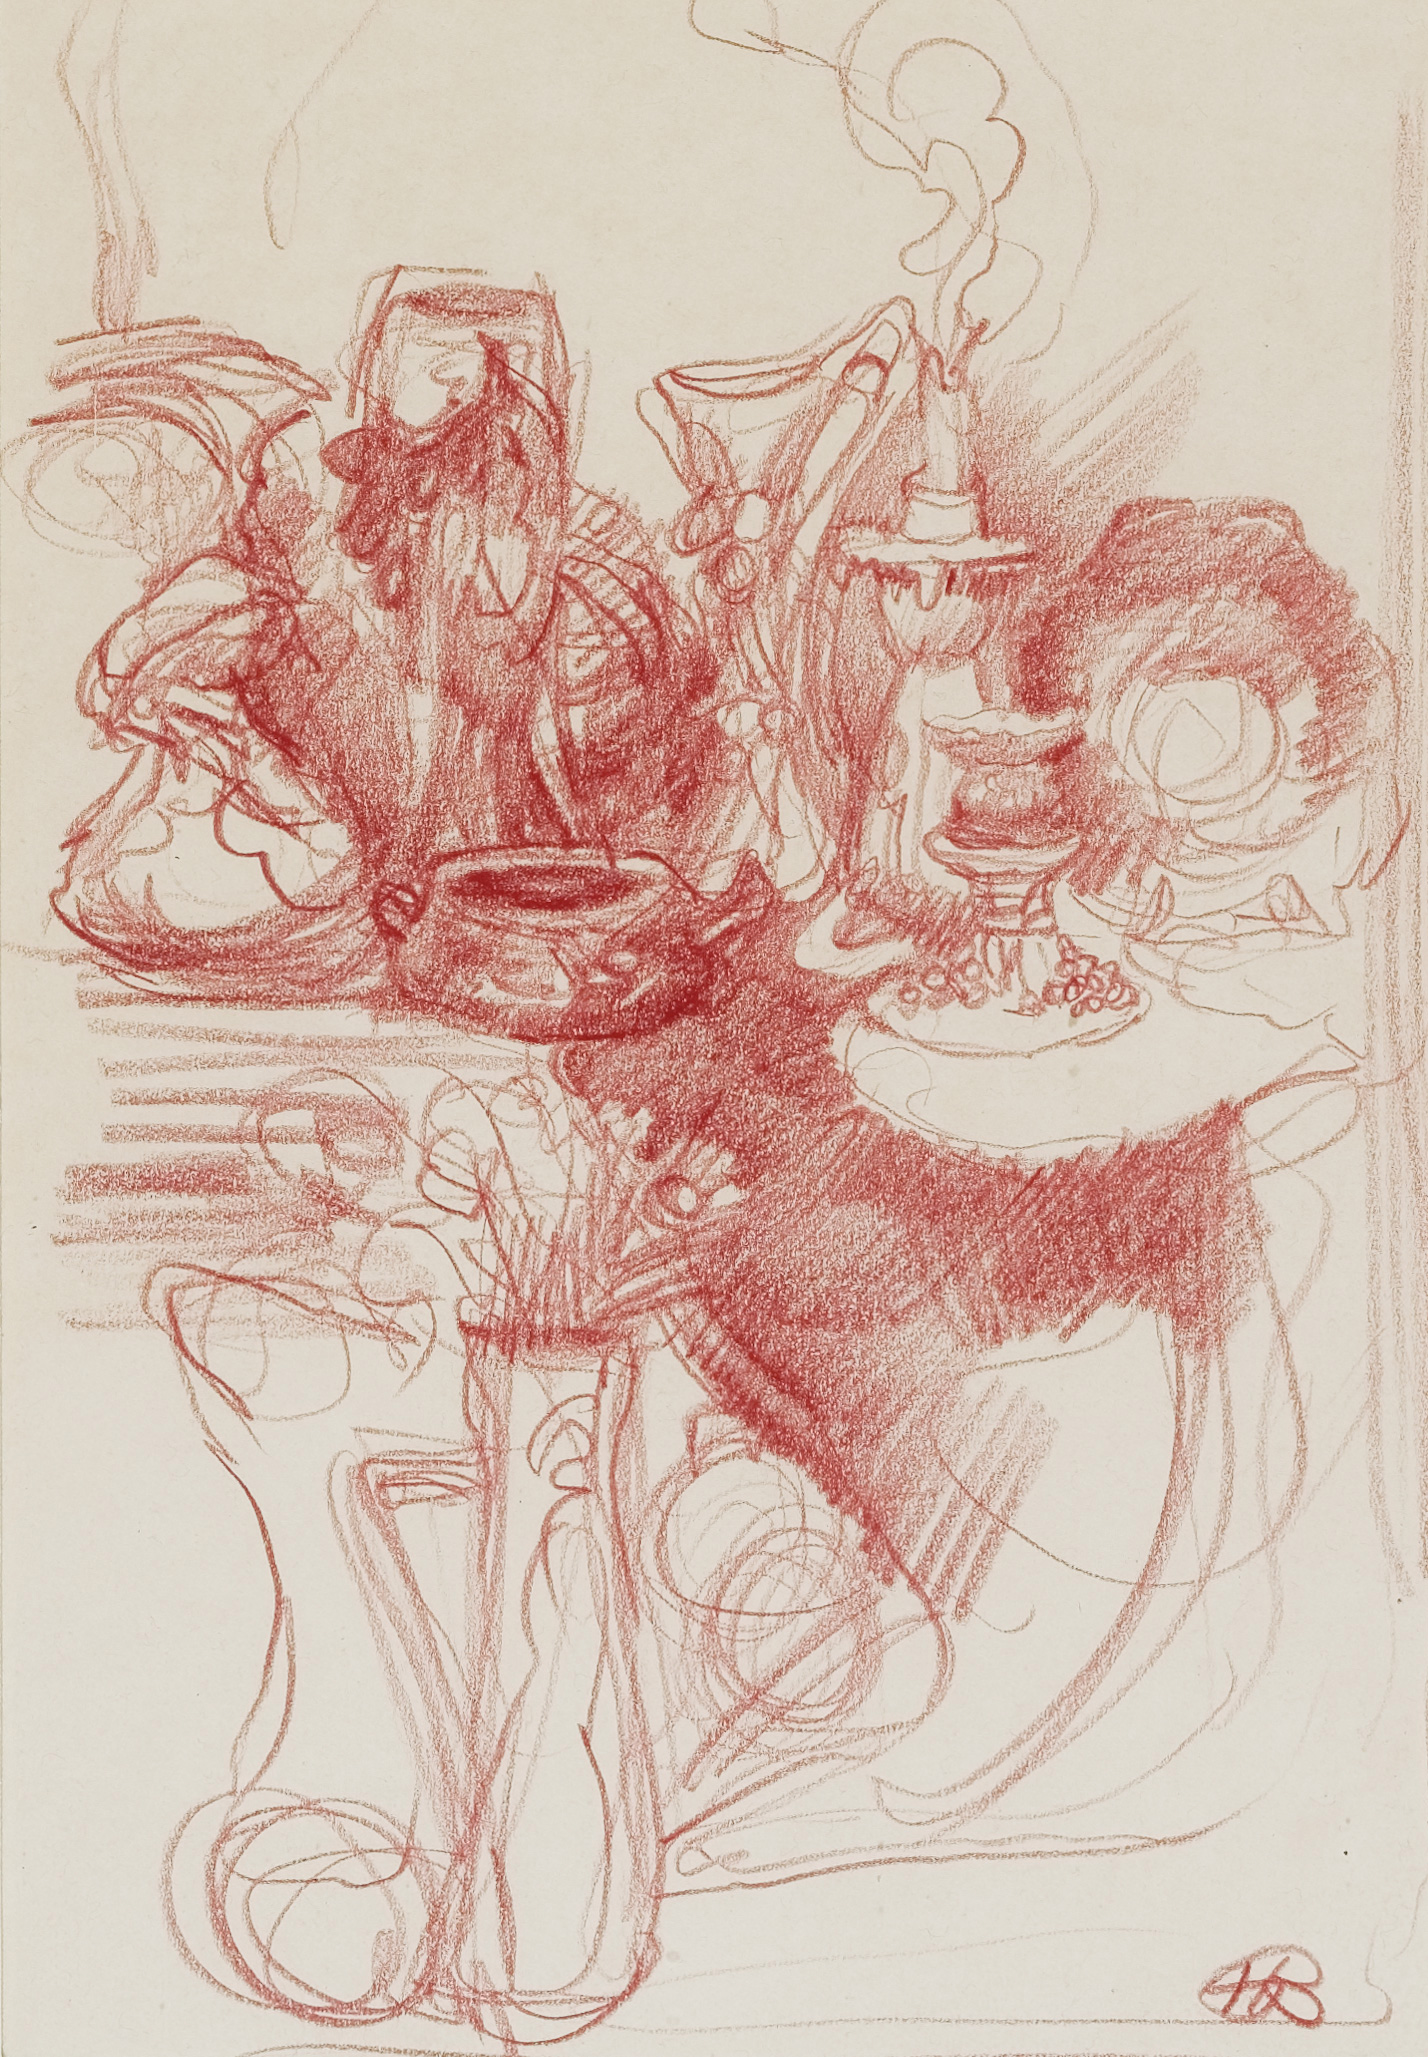 Study for Still Life with Pottery (c. 1980)